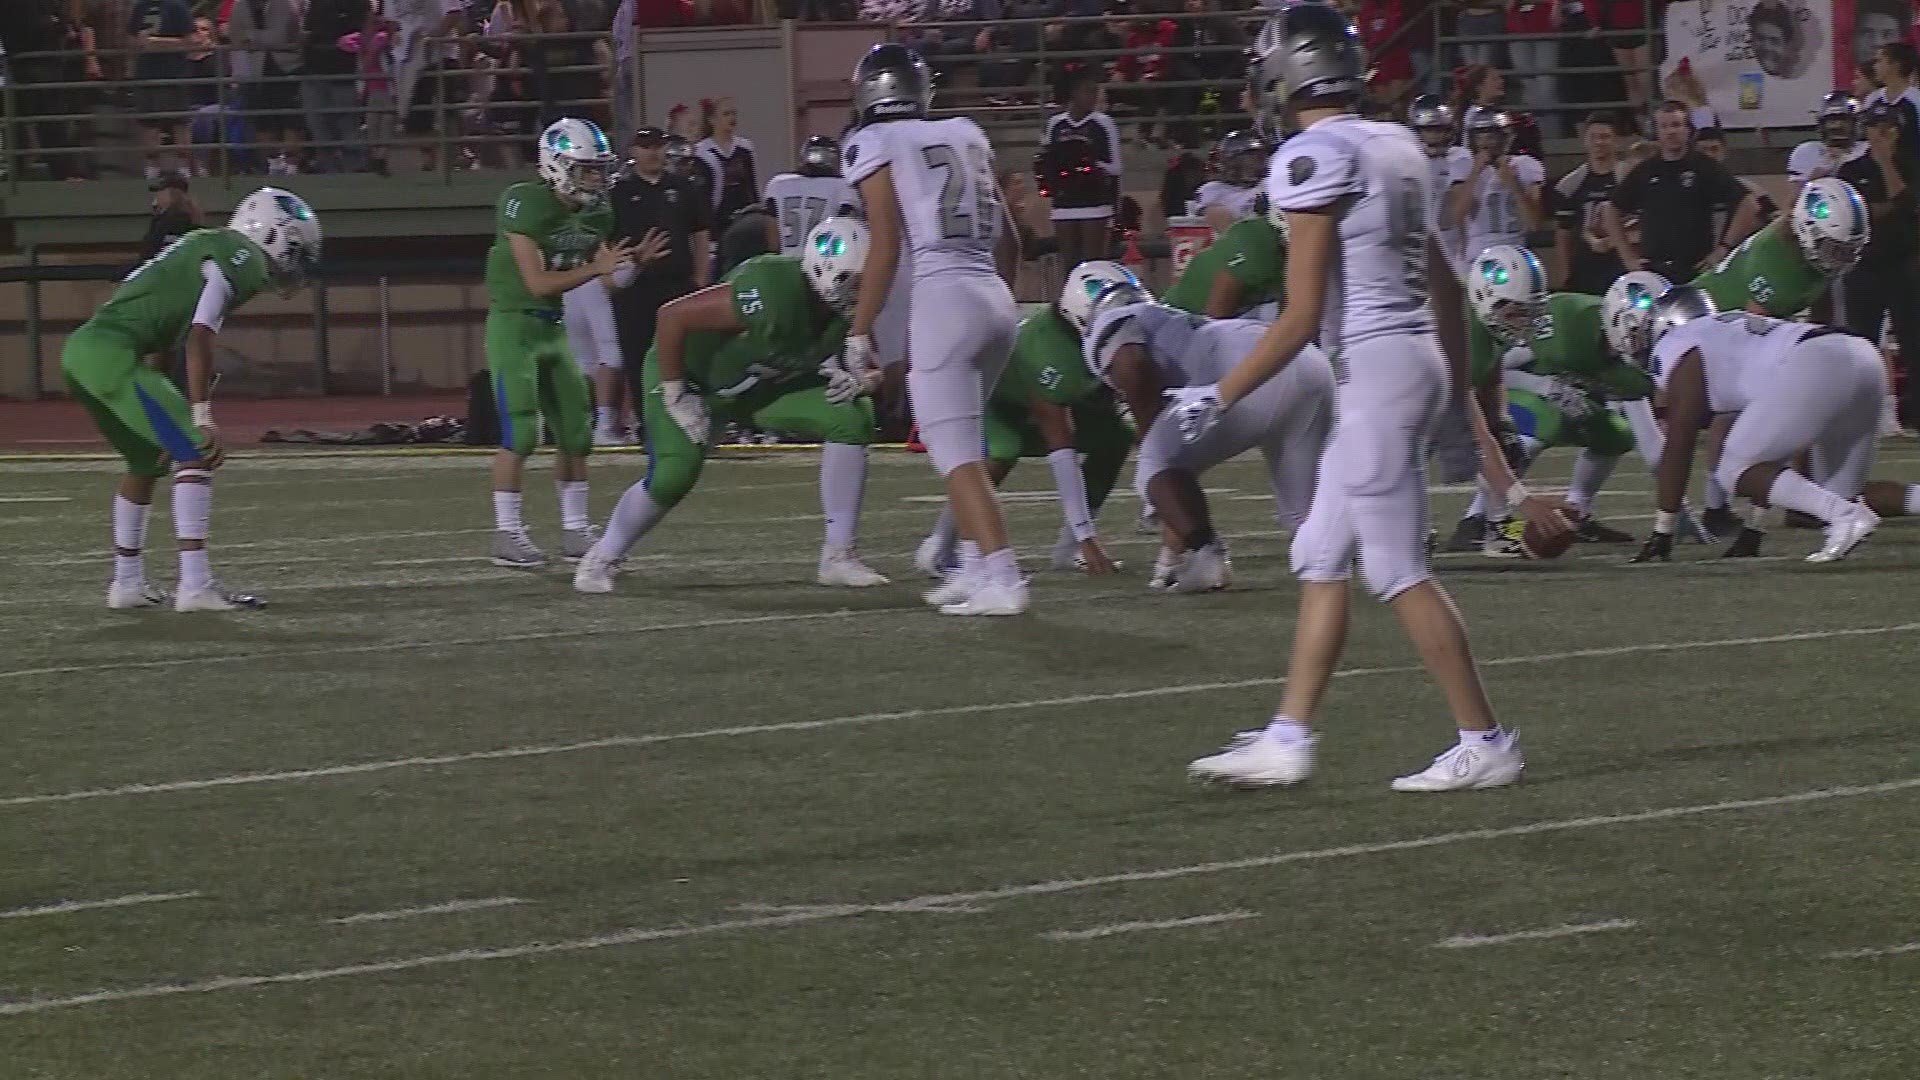 Highlights of the Mountain View Thunder's 2018 season in Washington. All highlights aired on KGW's Friday Night Flights #KGWPreps